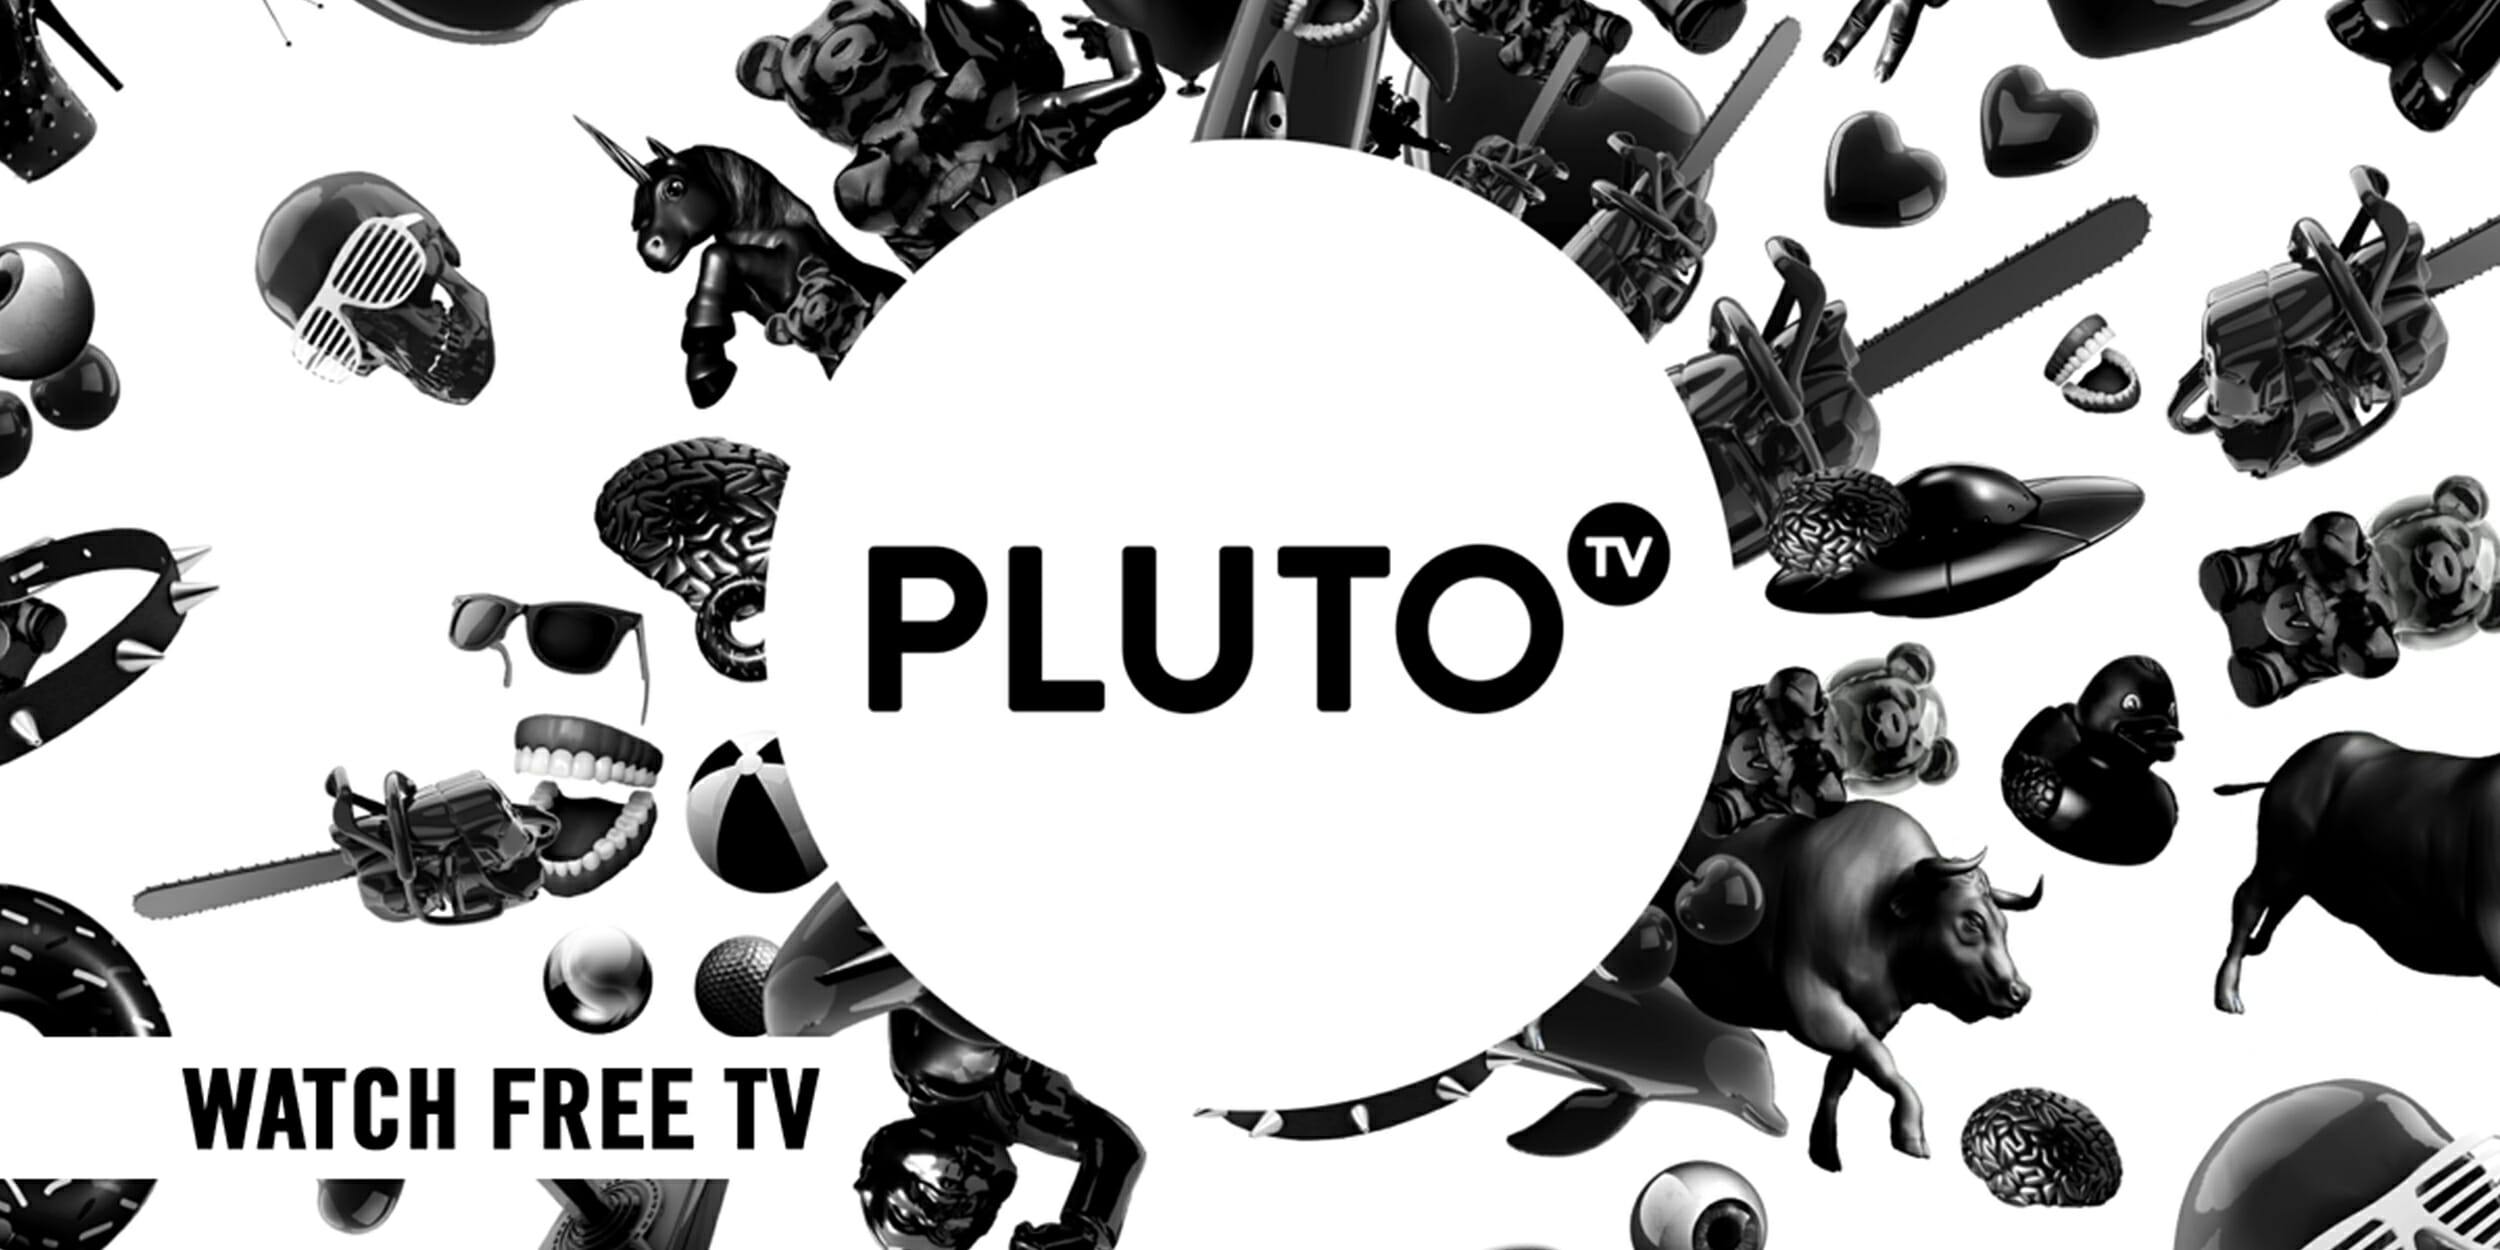 What Is Pluto Tv New Pluto Channels Devices And Free Live Tv - roblox escape the pluto